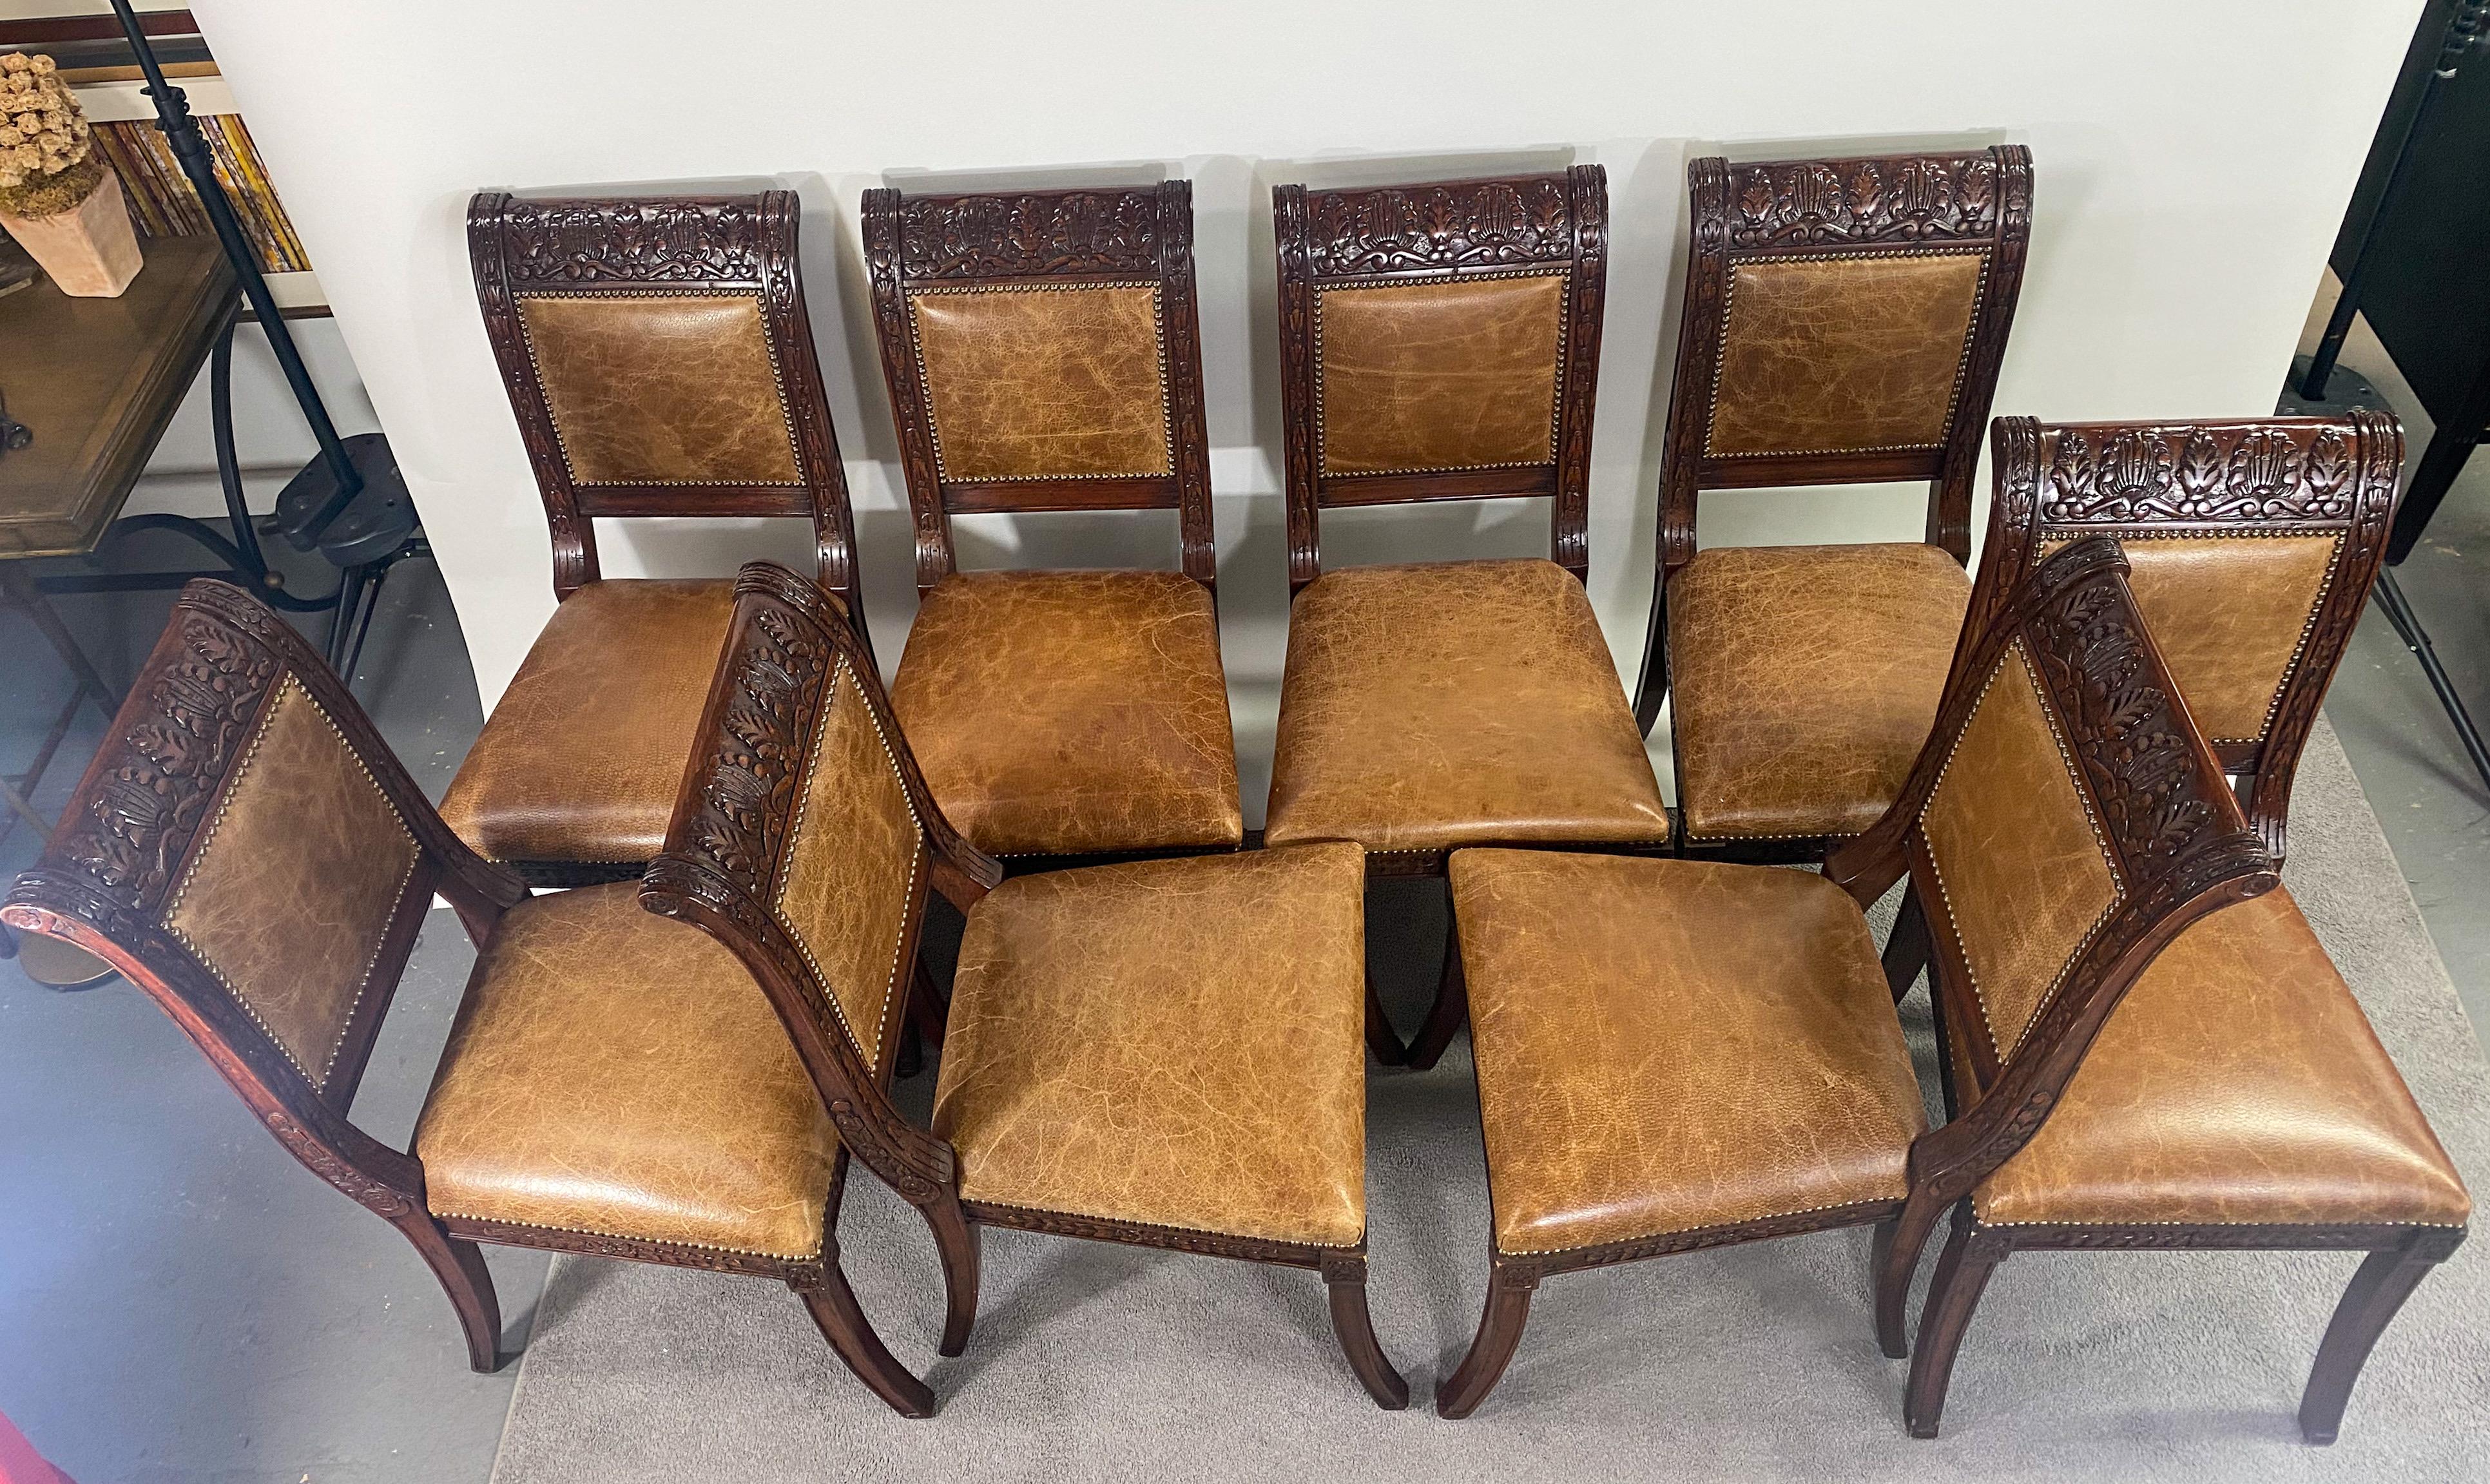 French Empire Style Mahogany & Leather Saber Legs Dining Chair, A Set of 8 For Sale 15